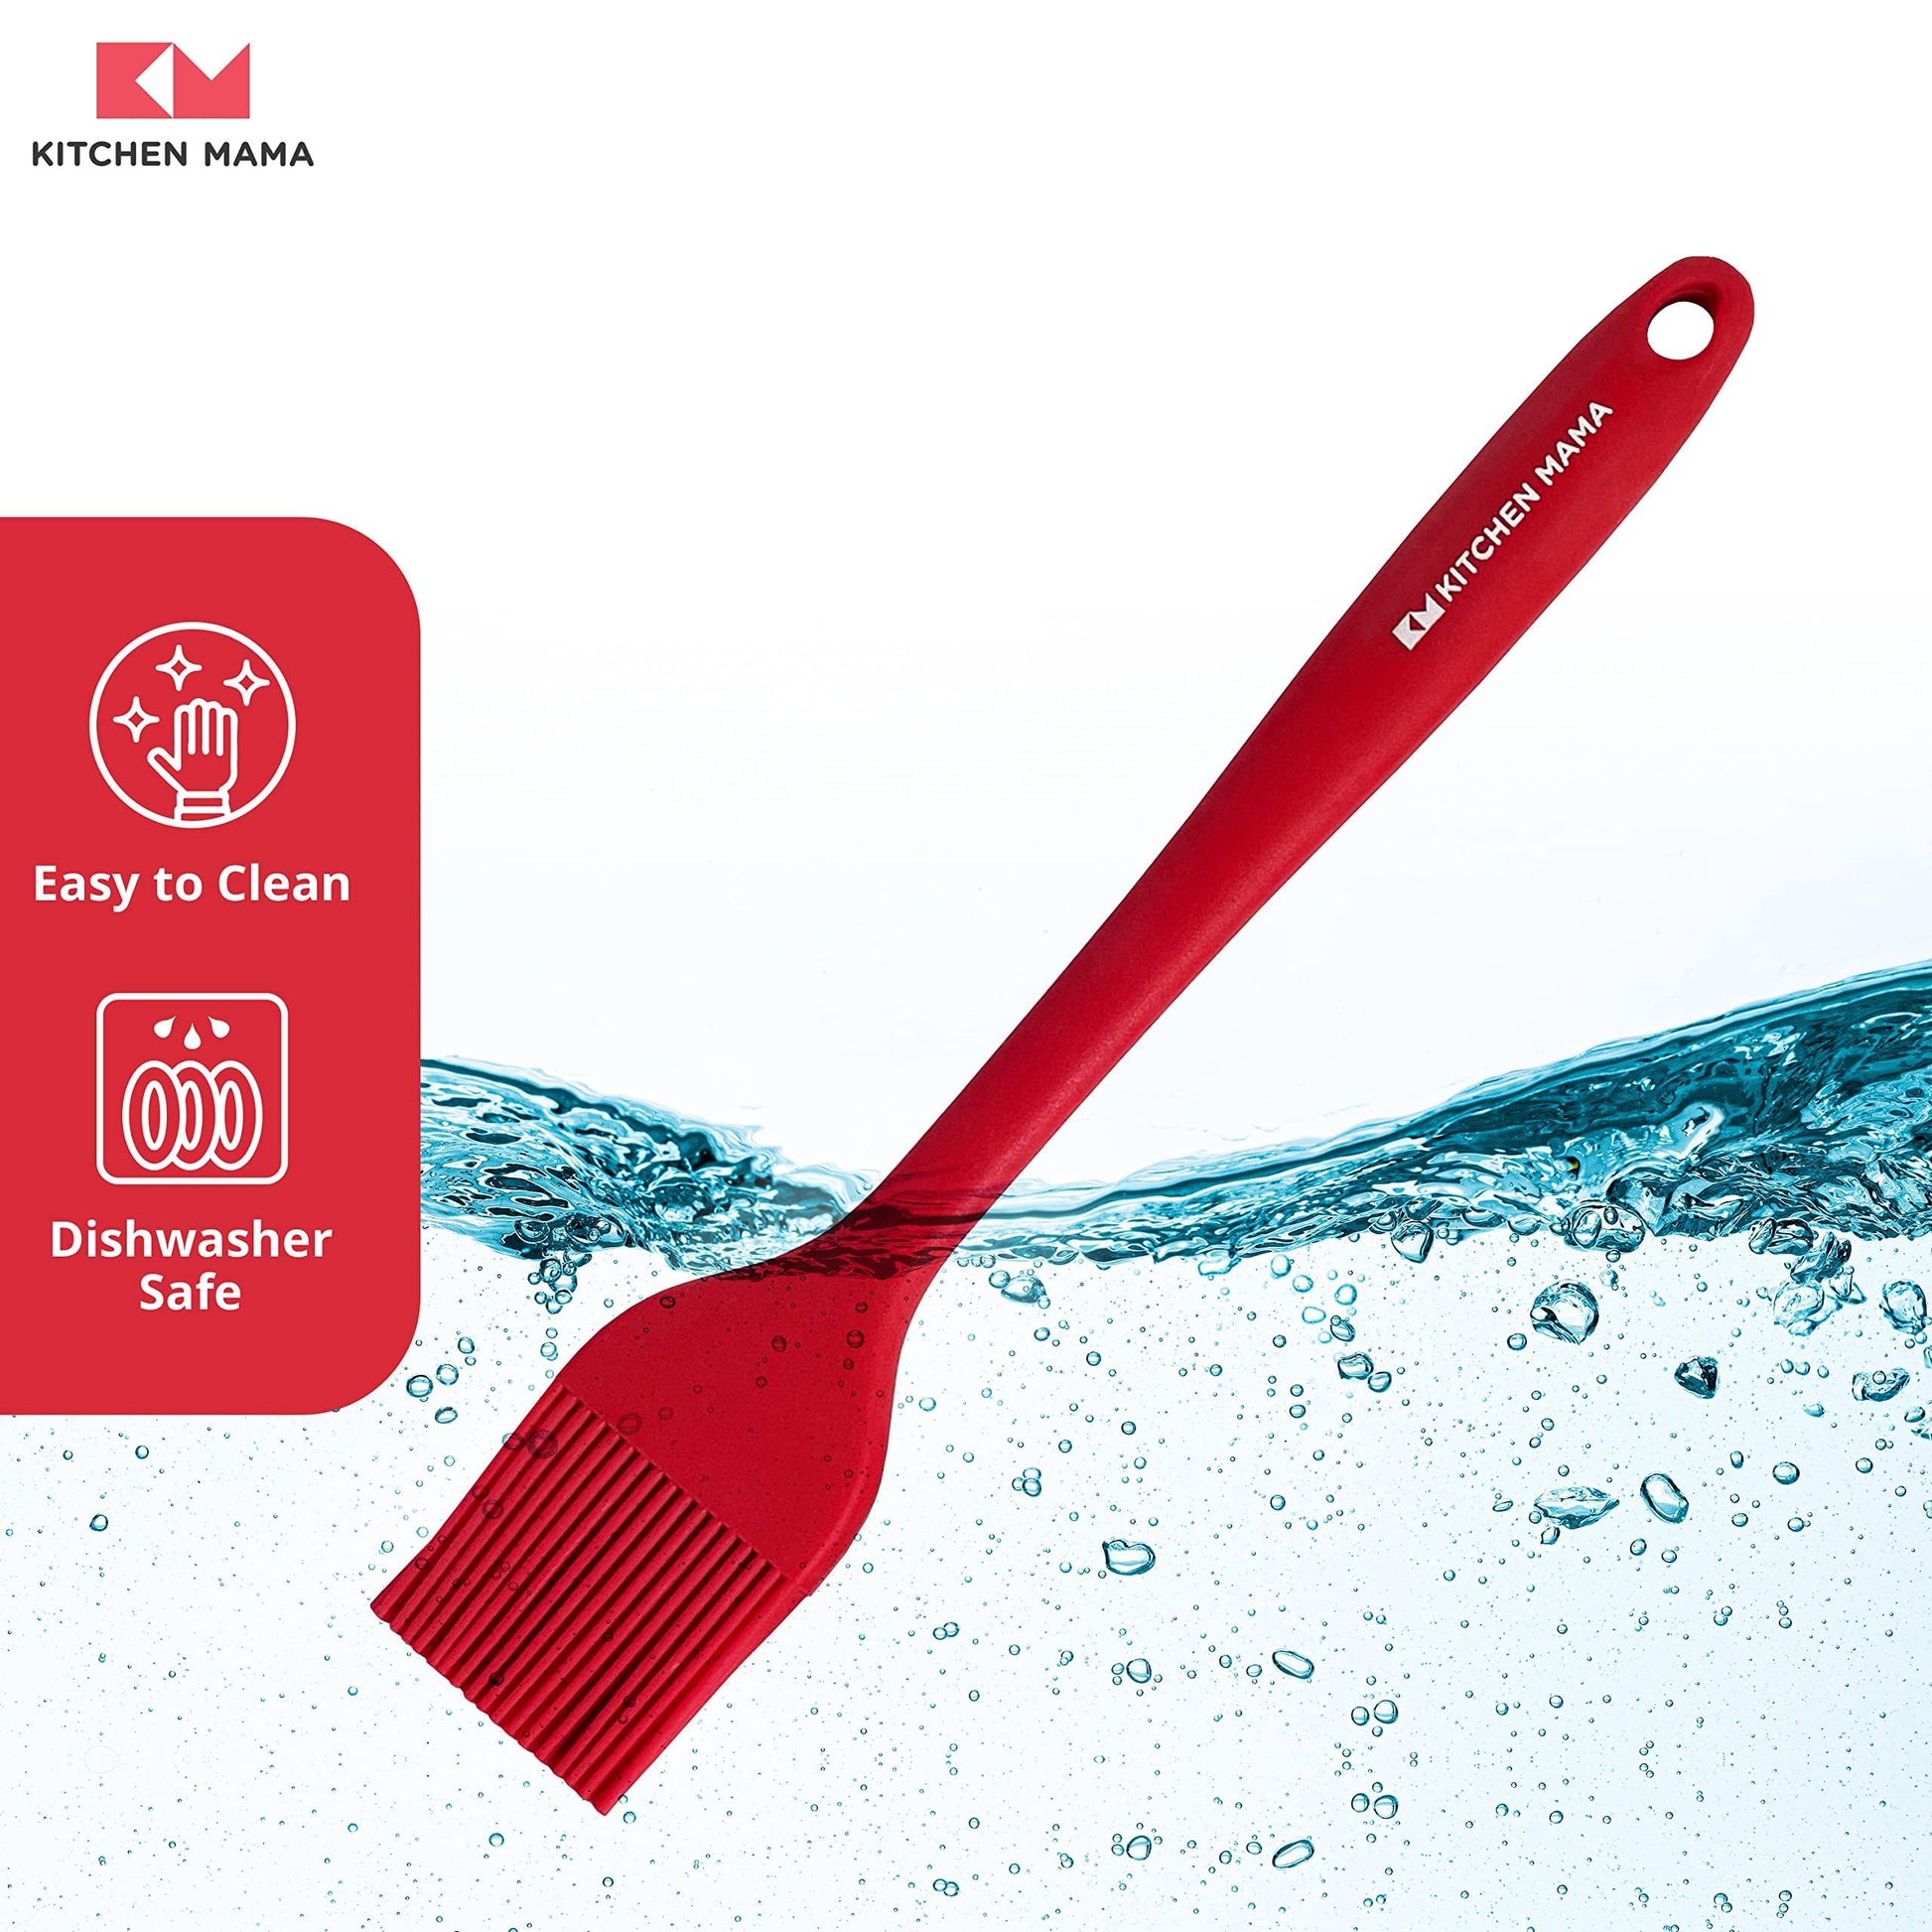 Kitchen Mama Silicone Basting Pastry Brush: Set of 2 Heat Resistant Basting Brushes for Baking, Grilling, Cooking and Spreading Oil, Butter, BBQ Sauce, or Marinade. Dishwasher Safe (Red) - CookCave